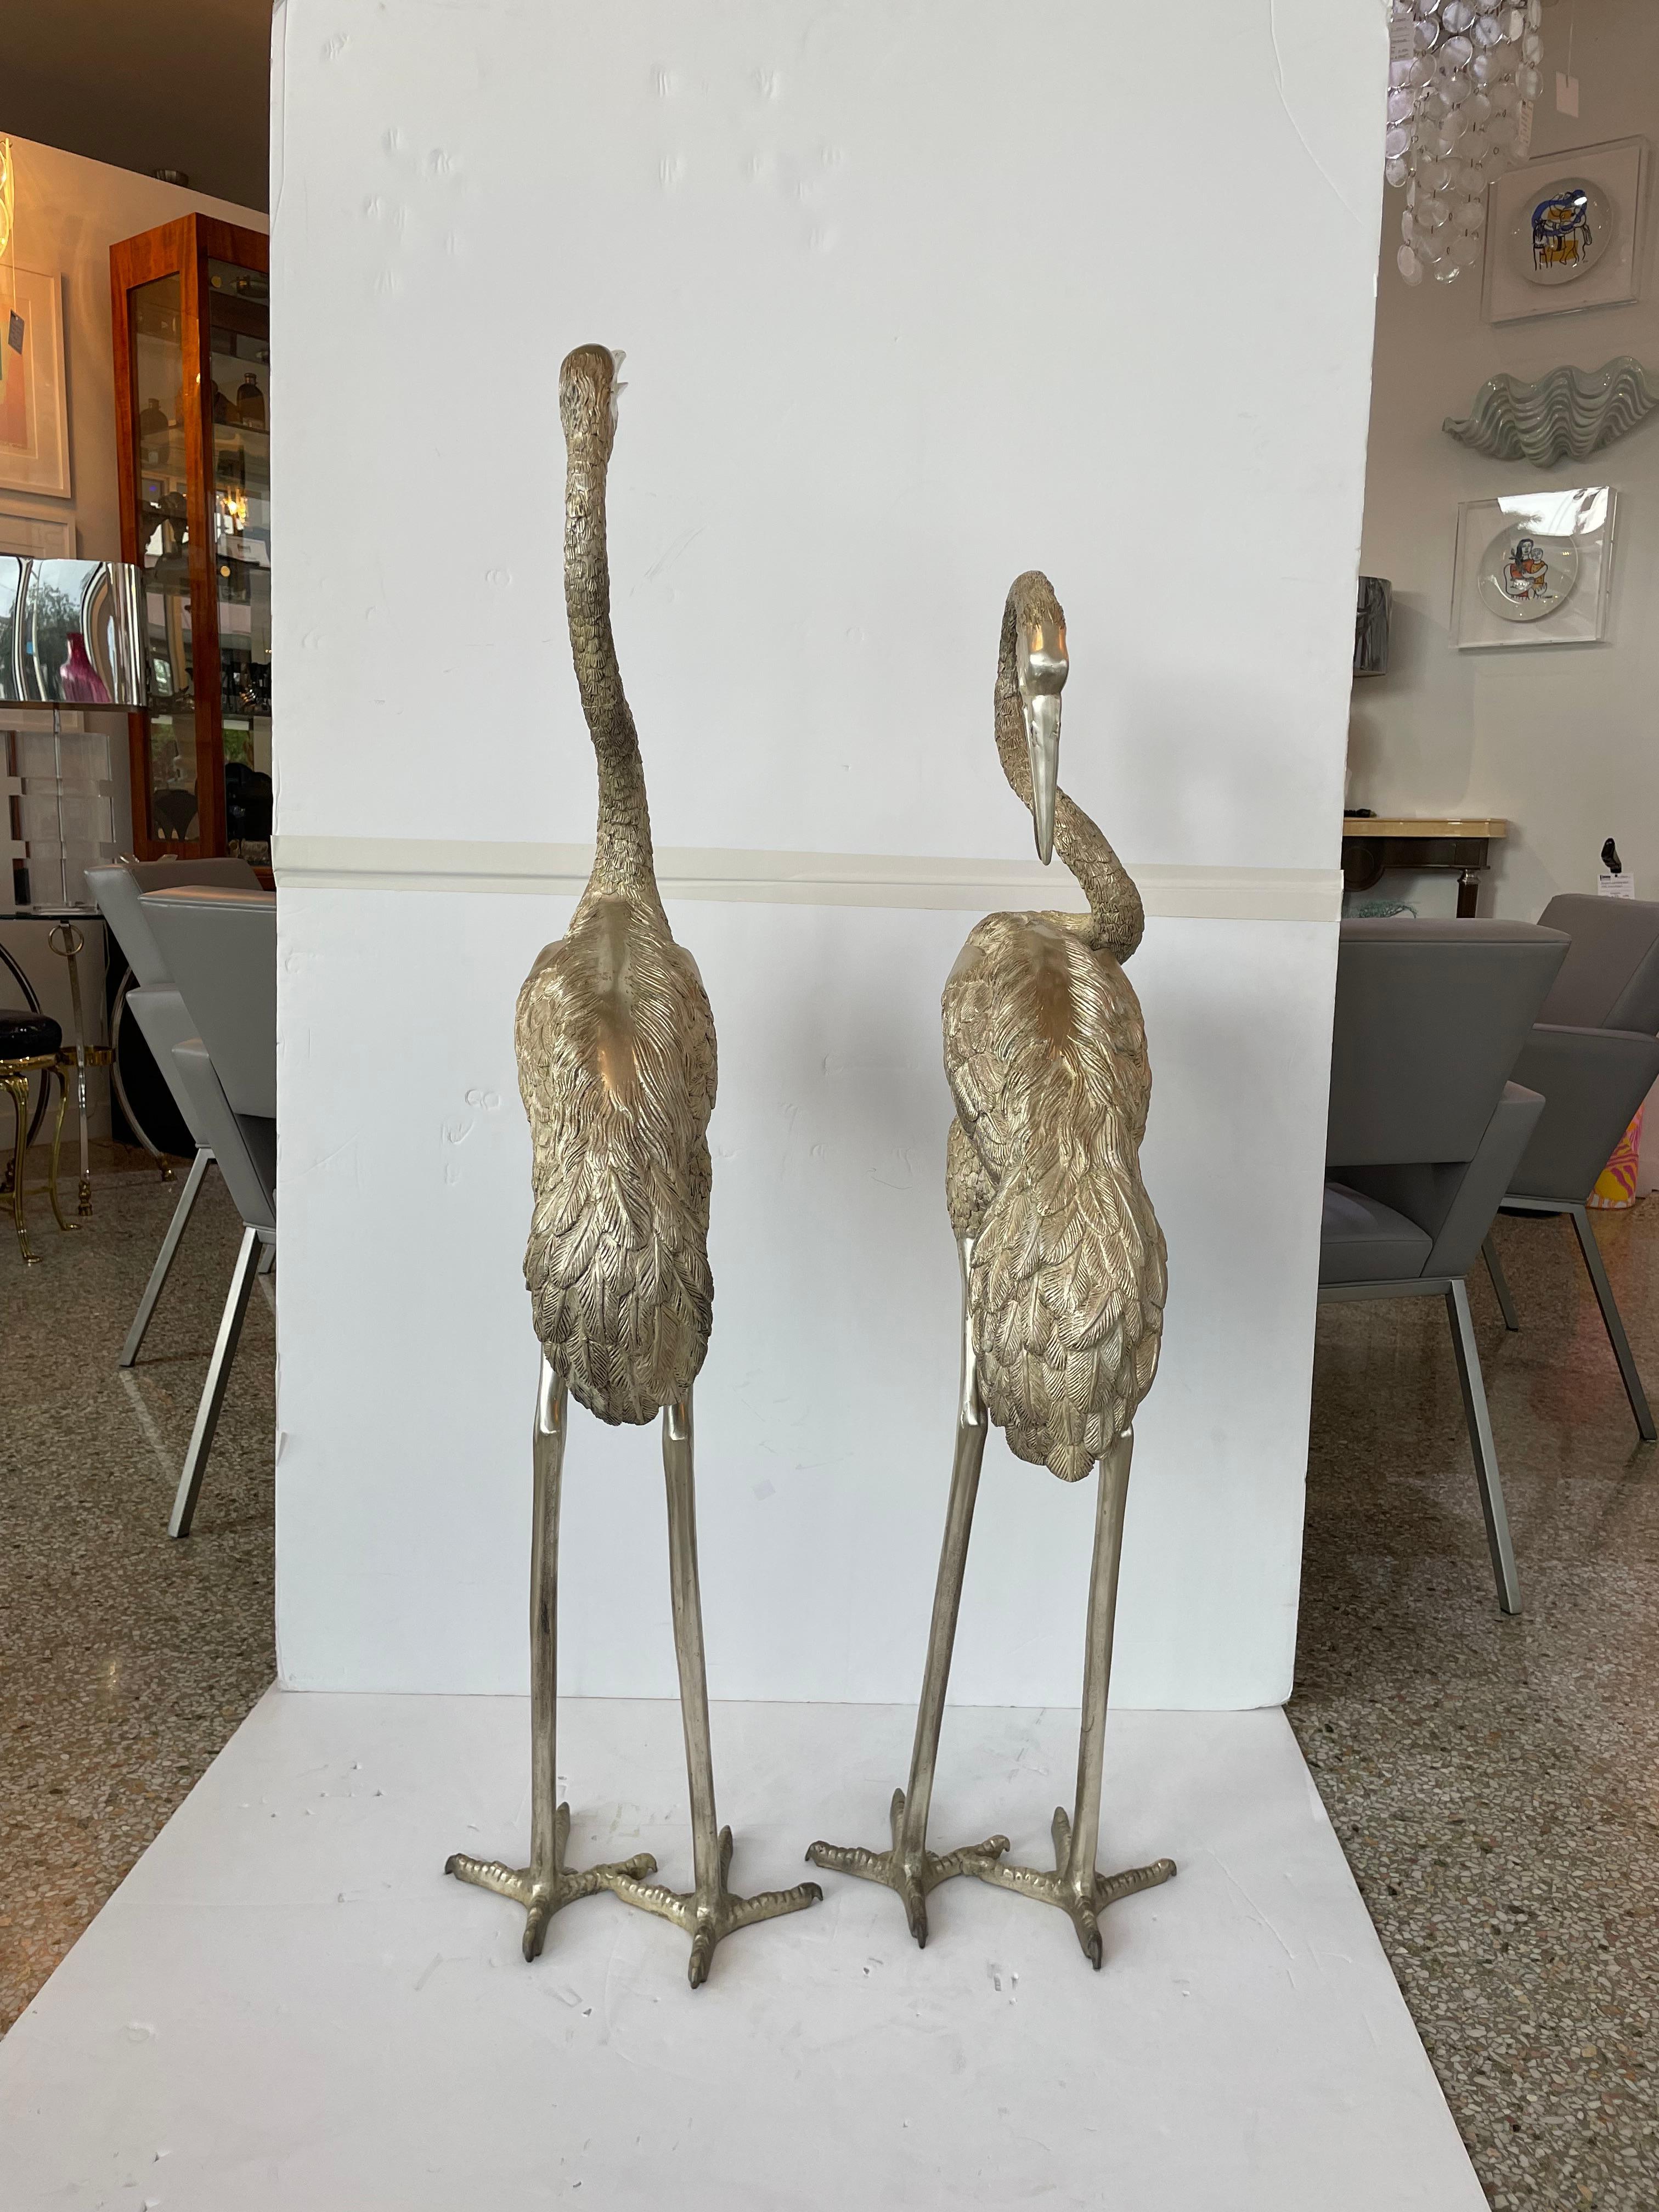 This stylish and chic set of two life size cranes will make a statement in your garden with their form and use of materials.  The pieces are cast bronze with a patinated nickel plating that catches the light beaufitully and dramaticly. 

Note: